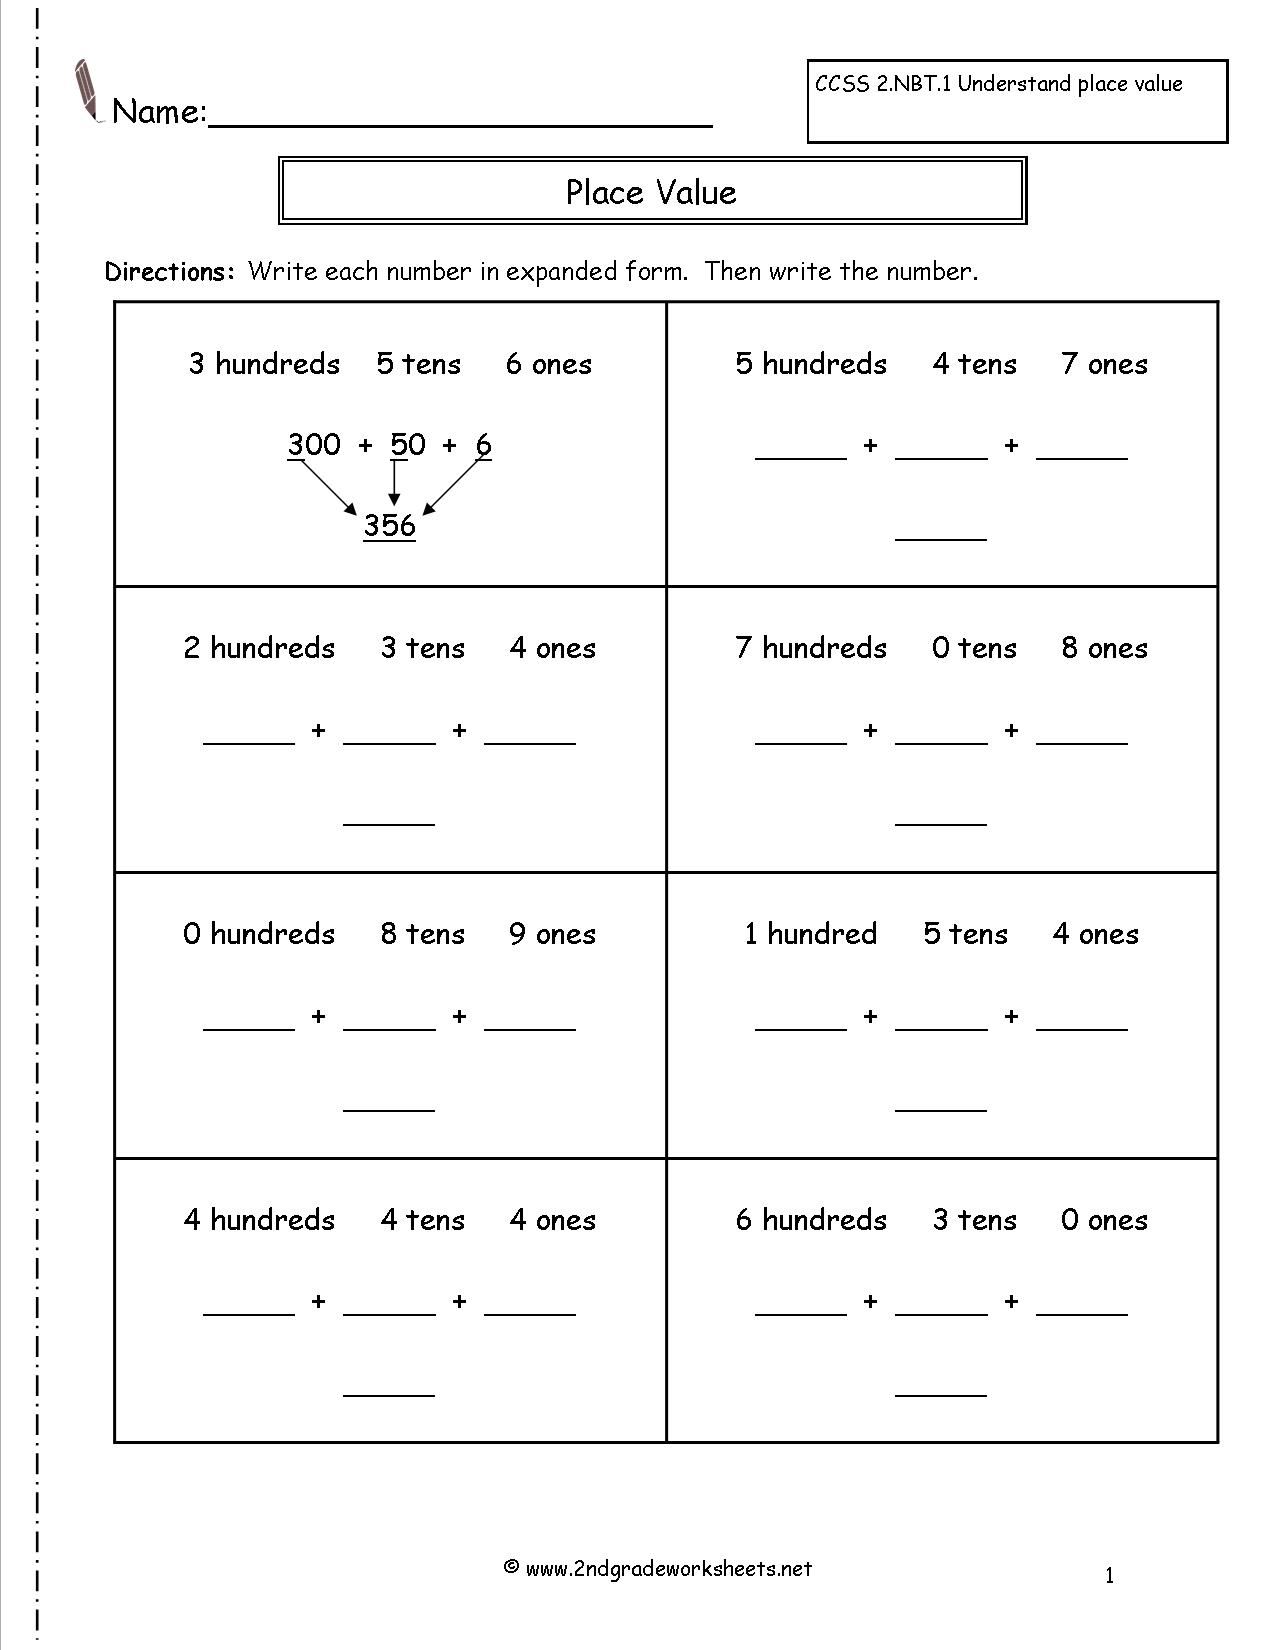 15-best-images-of-expanded-form-worksheets-write-numbers-in-expanded